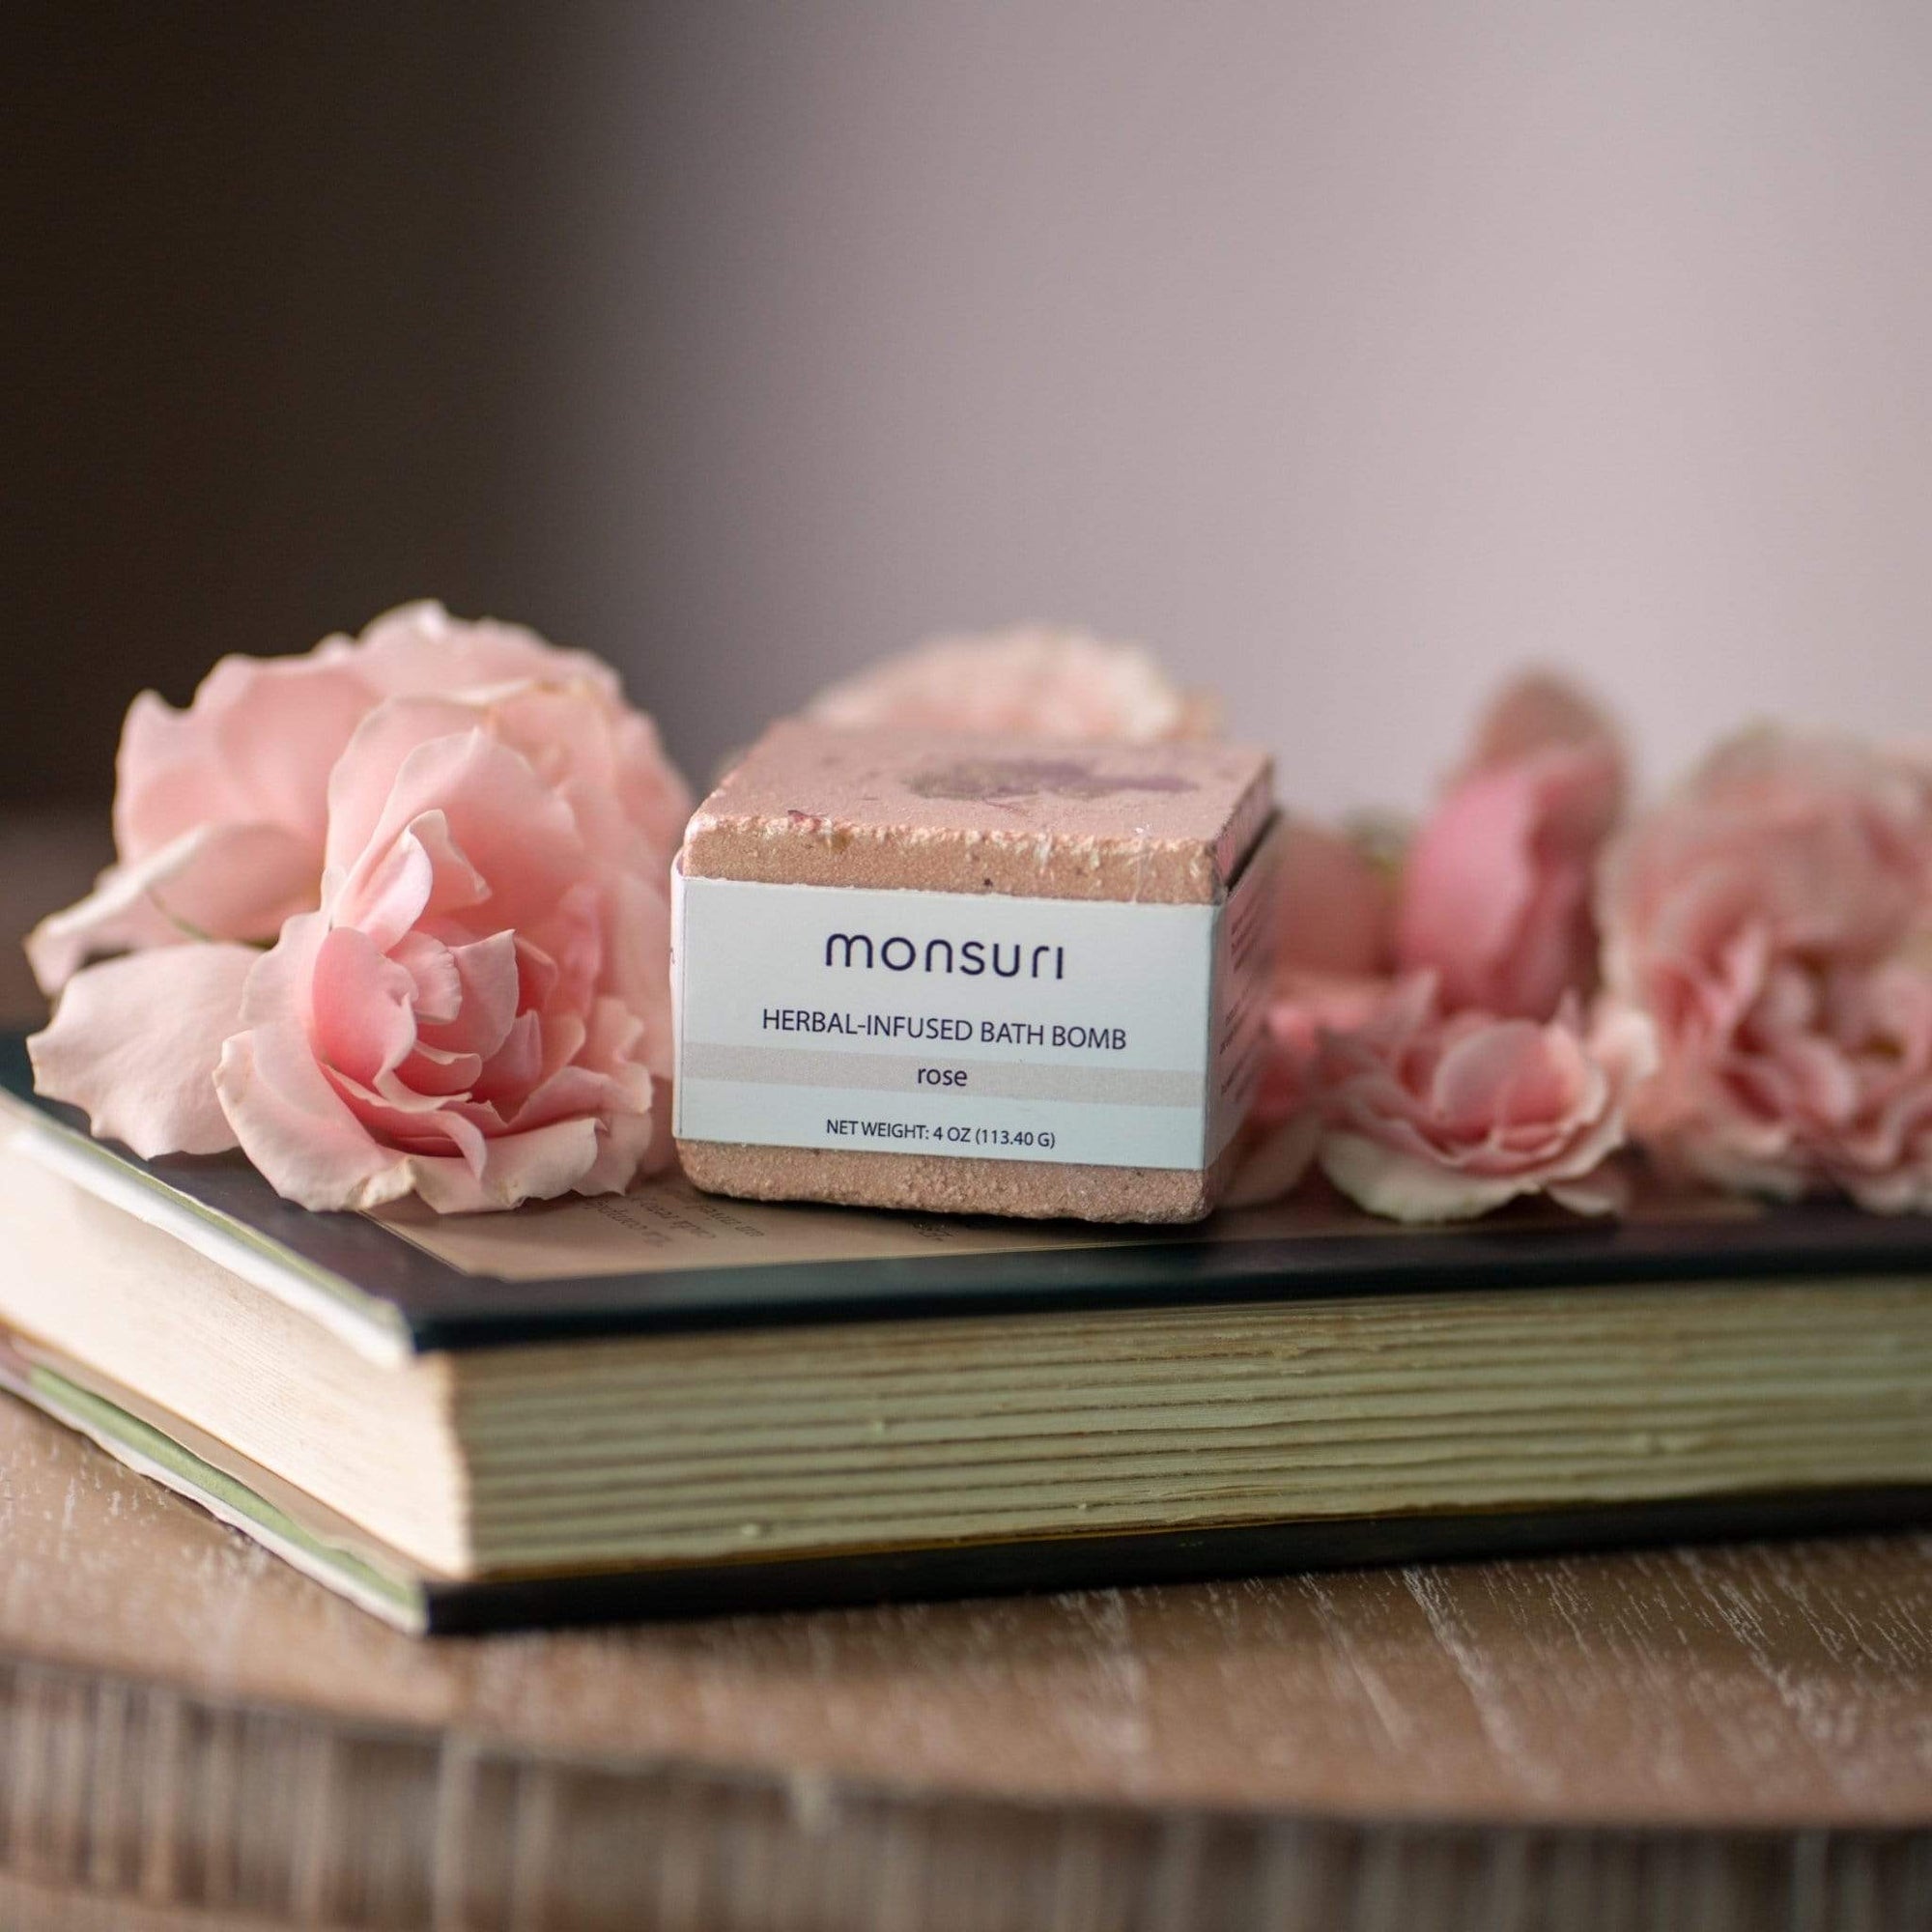 Monsuri's Rose Bath Bomb, an indulgent blend of organic ingredients for ultimate self-care.